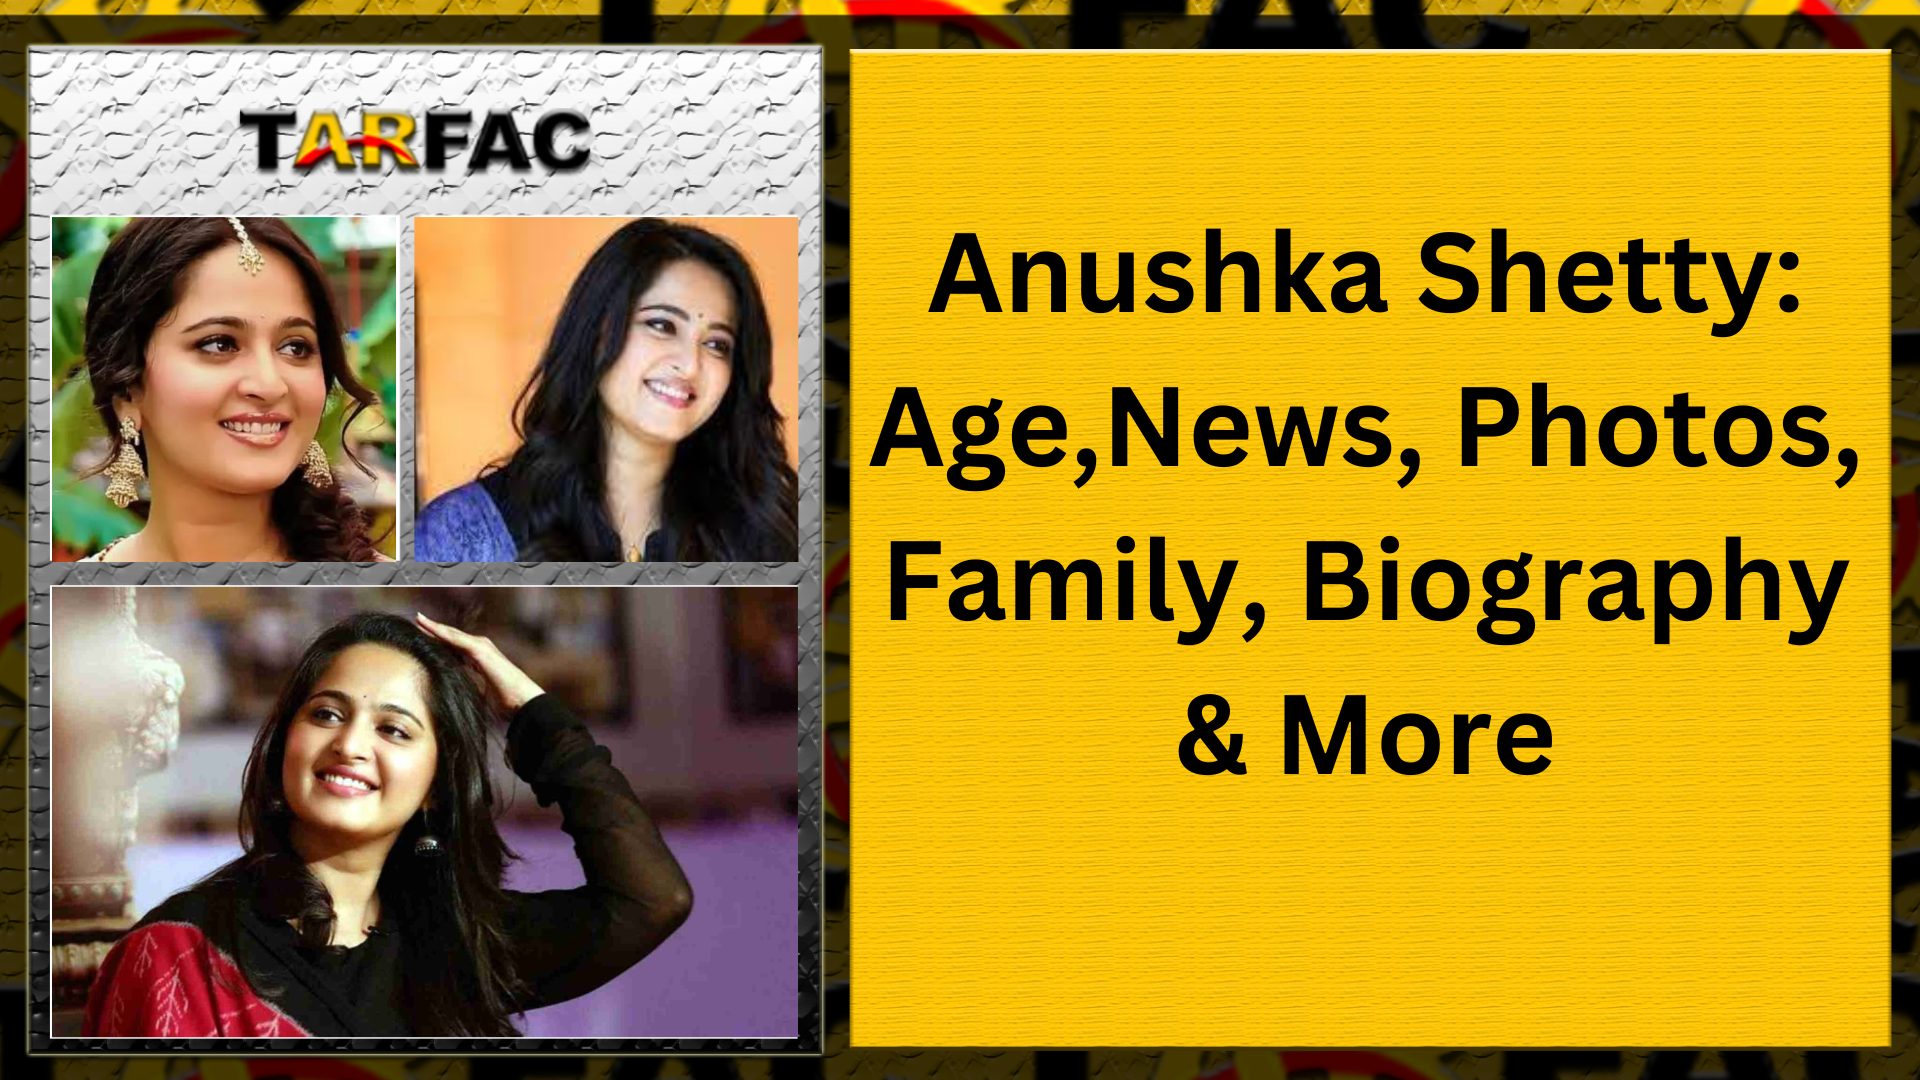 You are currently viewing Anushka Shetty : Age,News, Photos, Family, Biography & More